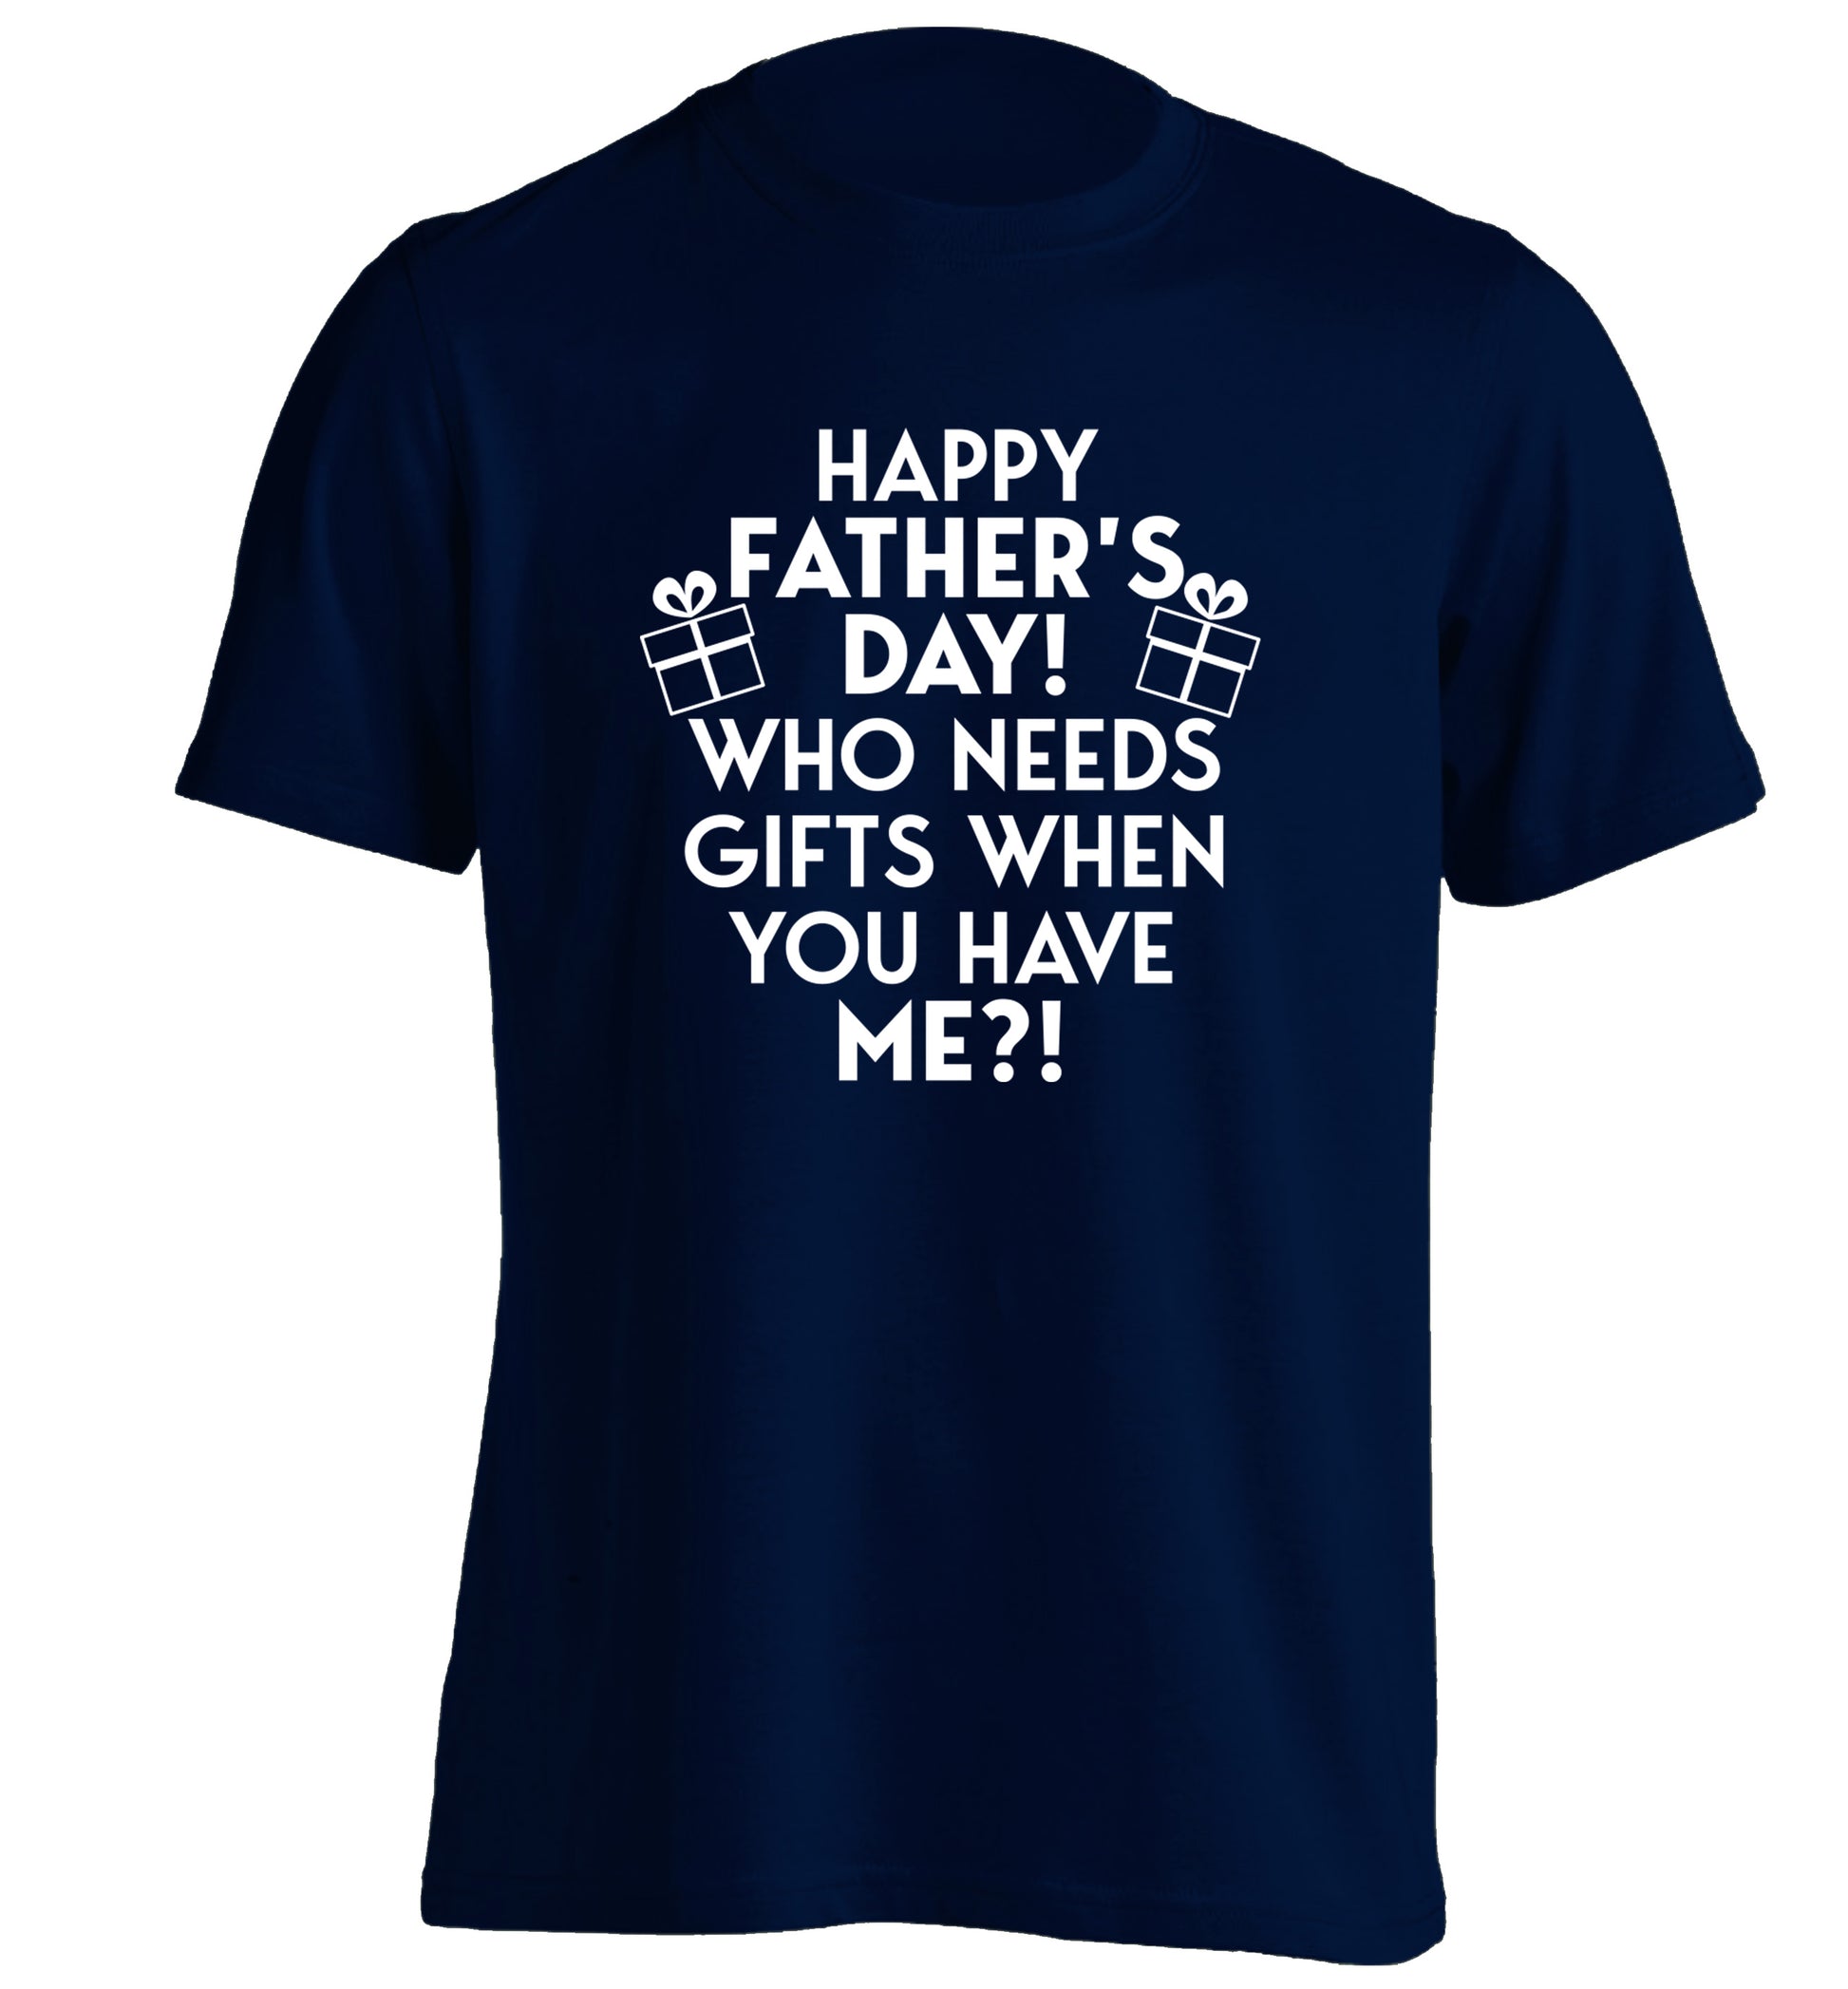 Happy Father's day, who needs a present when you have me adults unisex navy Tshirt 2XL